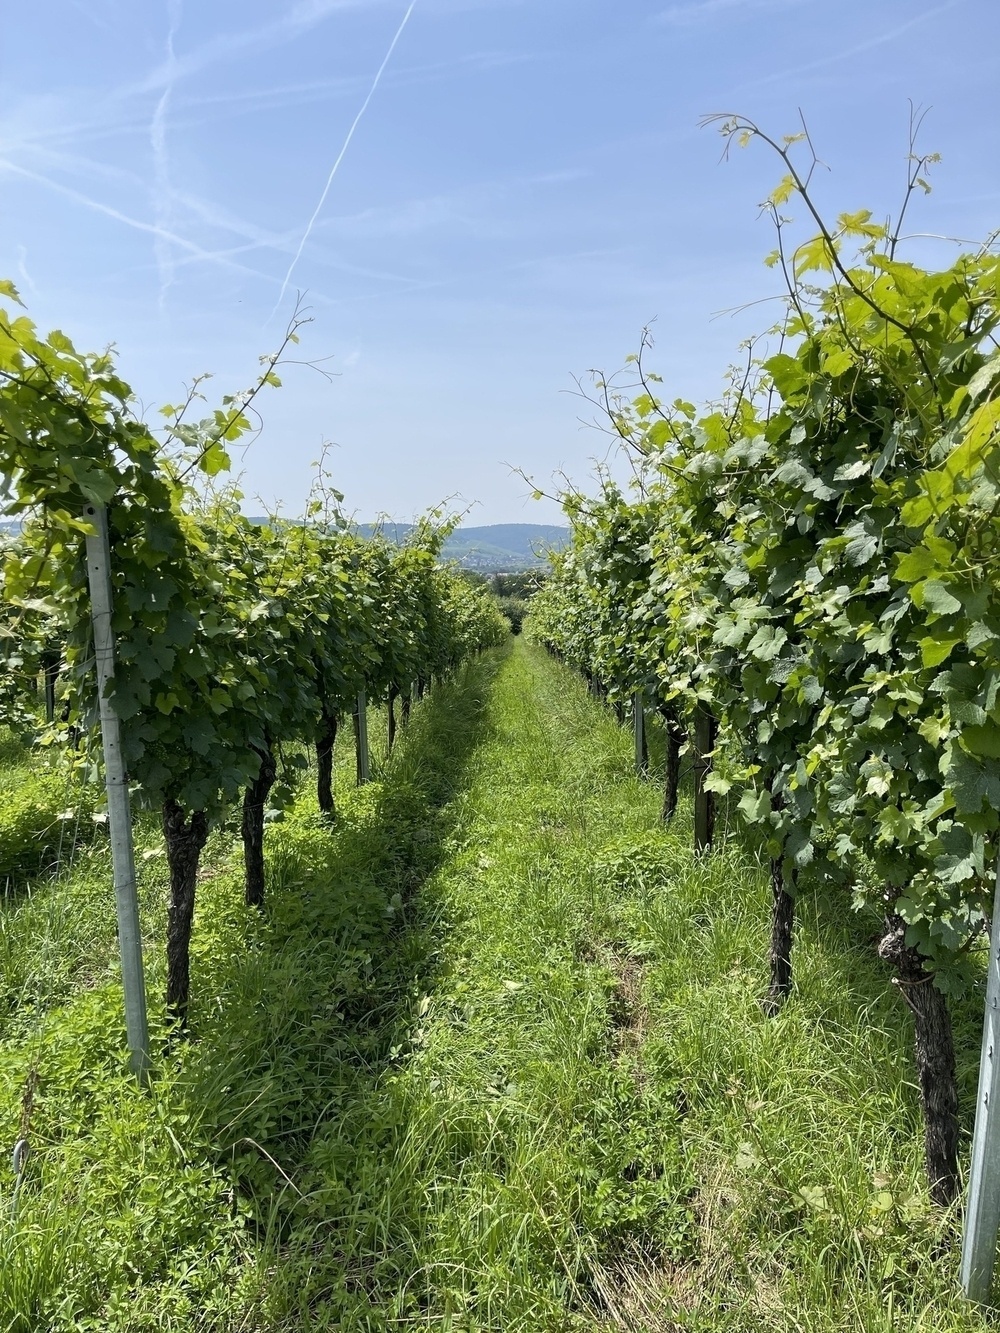 Rows of grapevines on a vineyard stretch into the distance under a clear, blue sky.